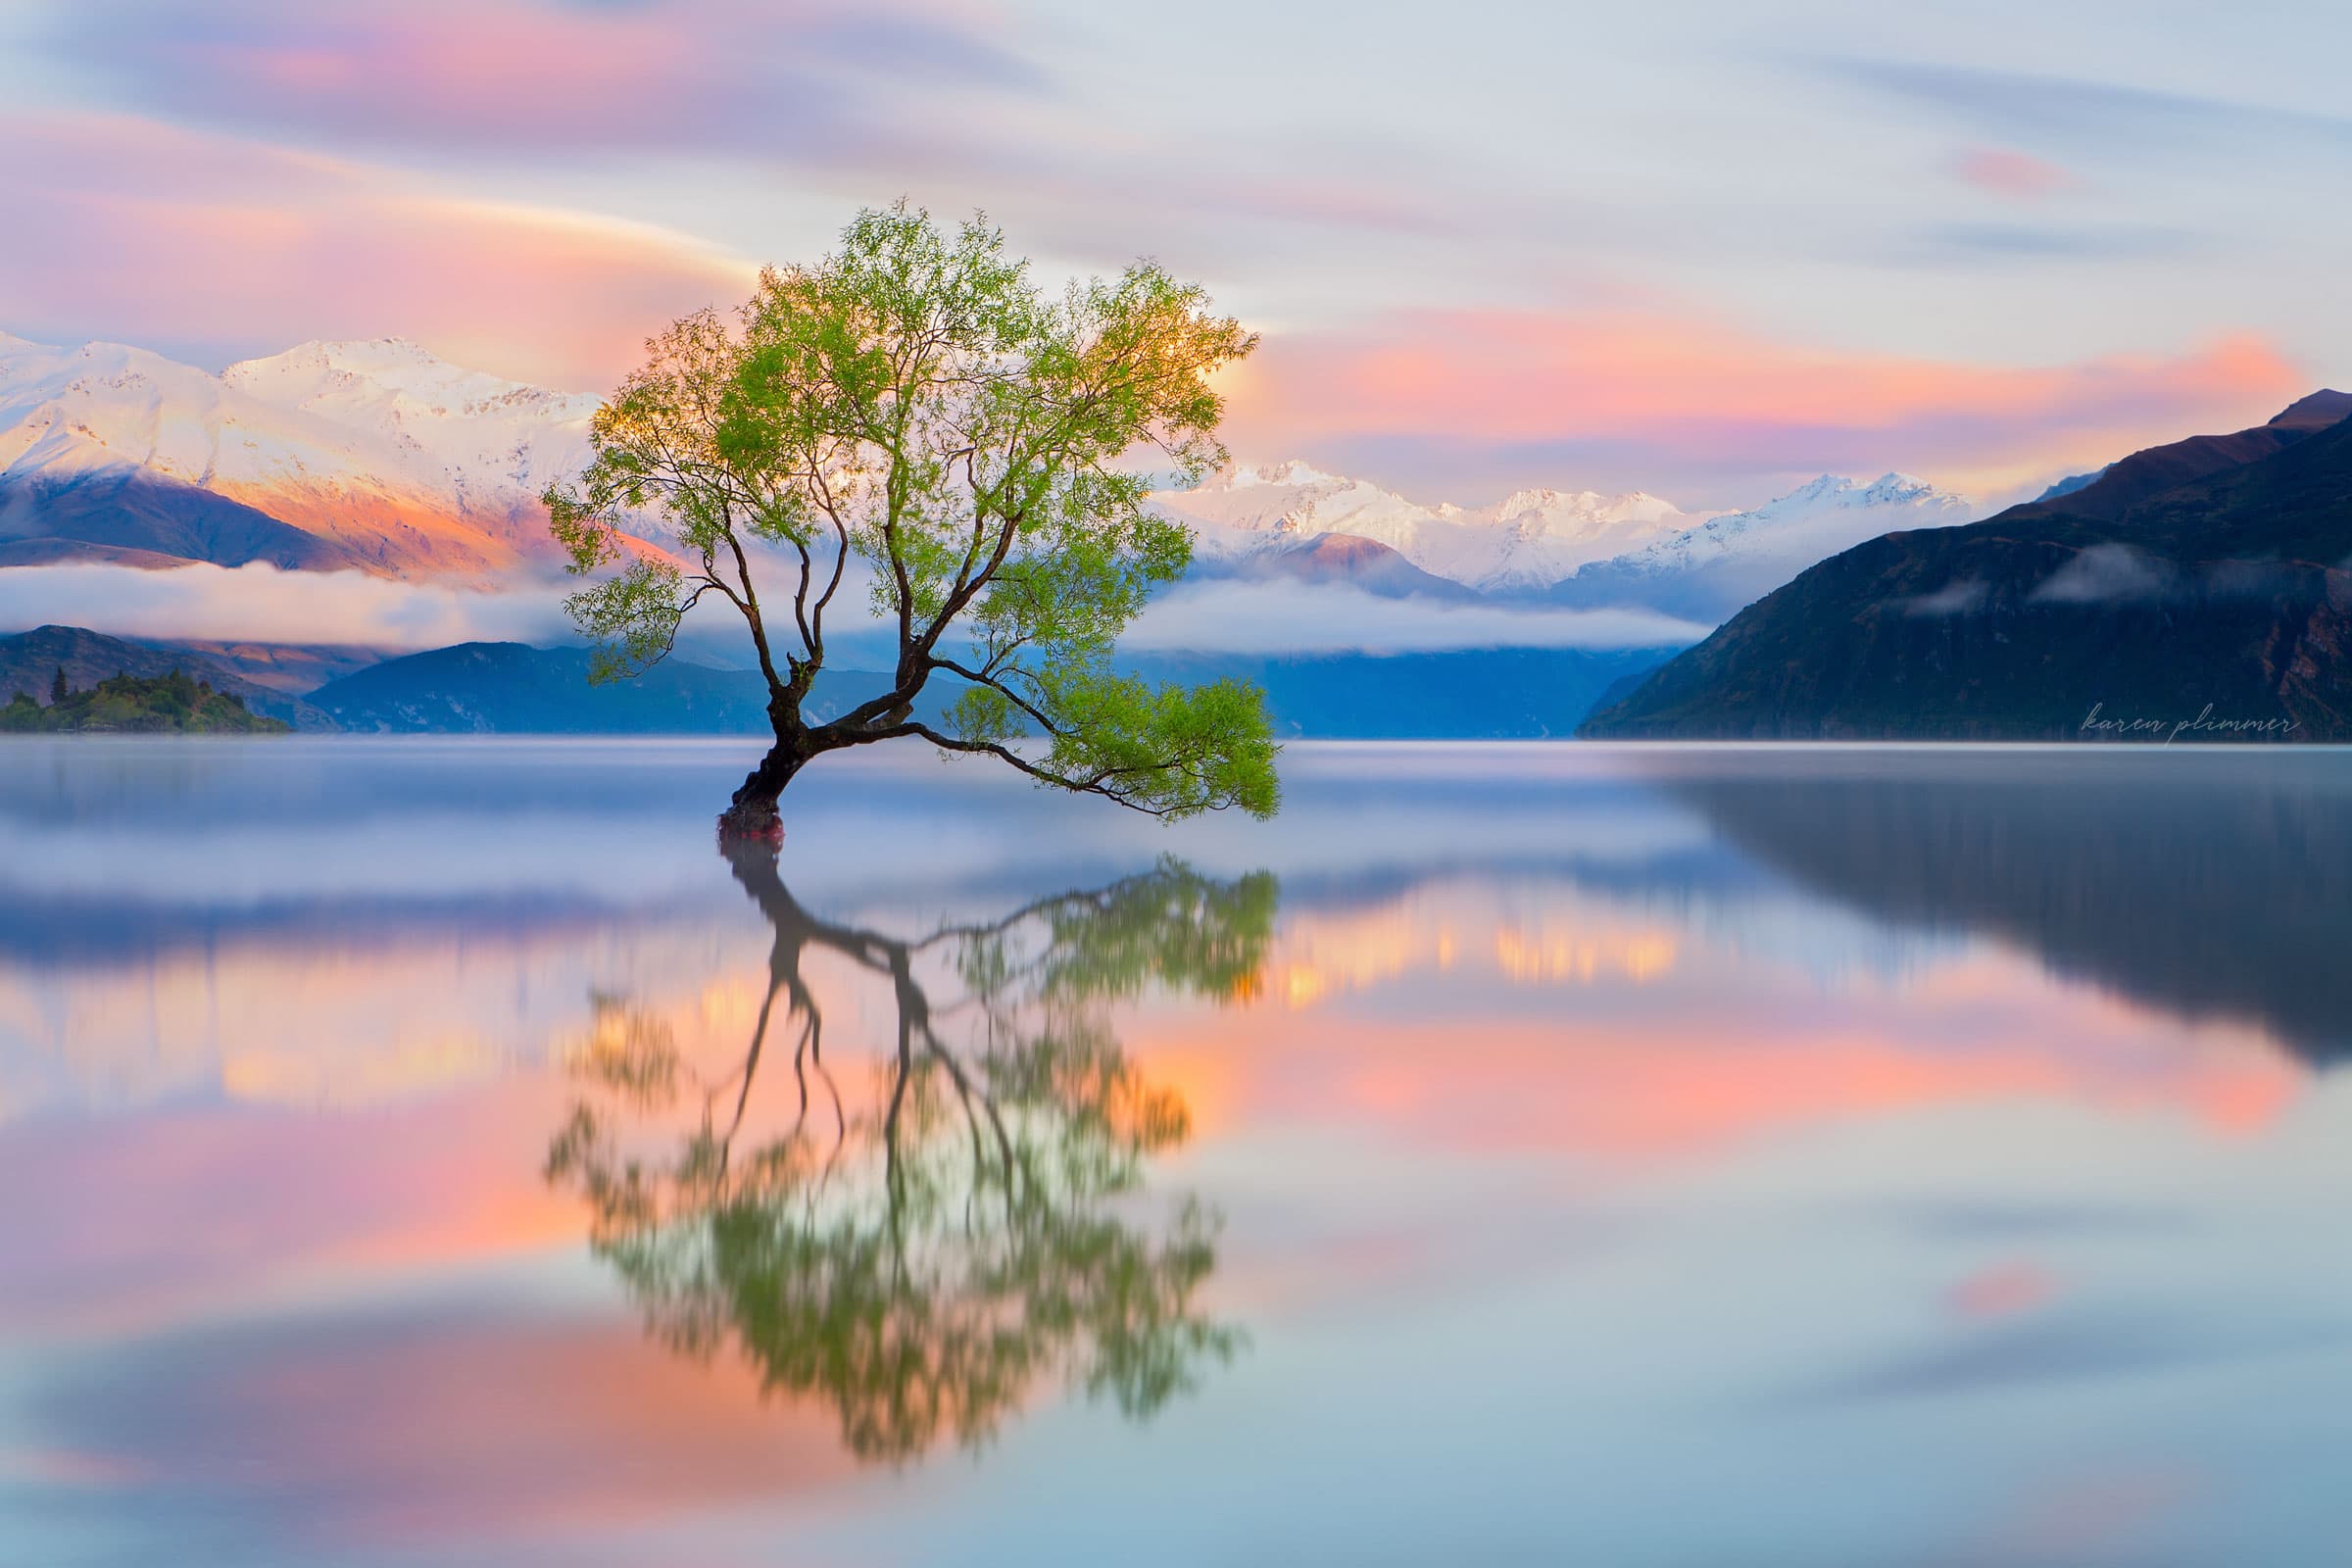 pastel colours at sunrise over the Lake Wanaka willow tree give a feeling of serenity.